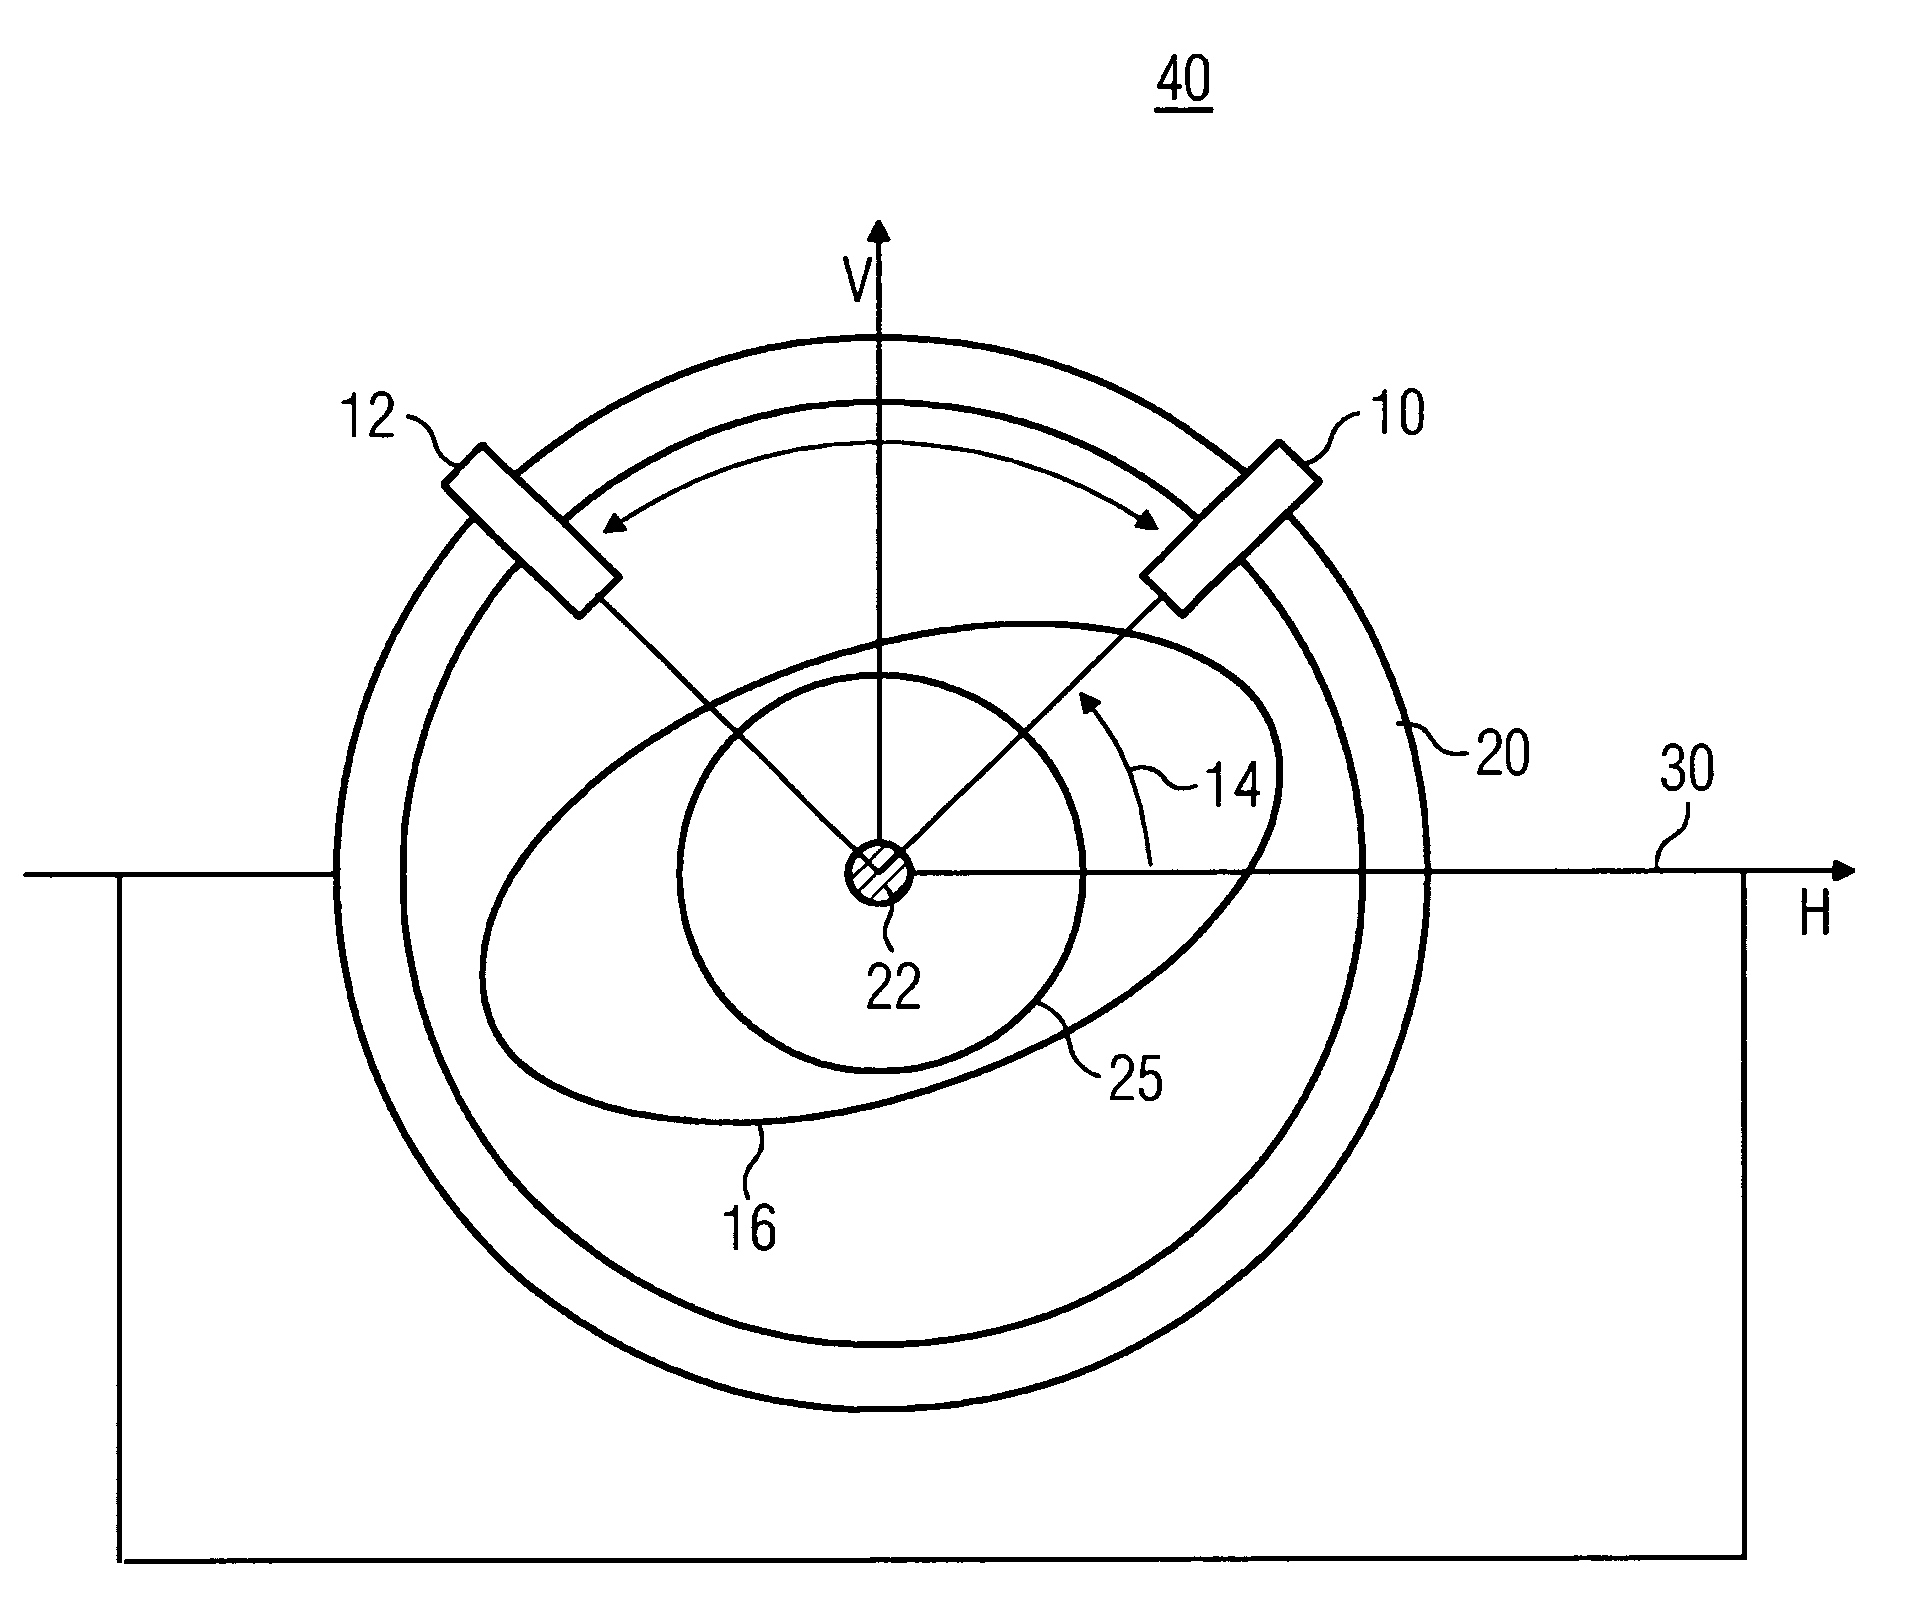 Method and device for monitoring the dynamic behavior of a rotating shaft, in particular of a gas or steam turbine